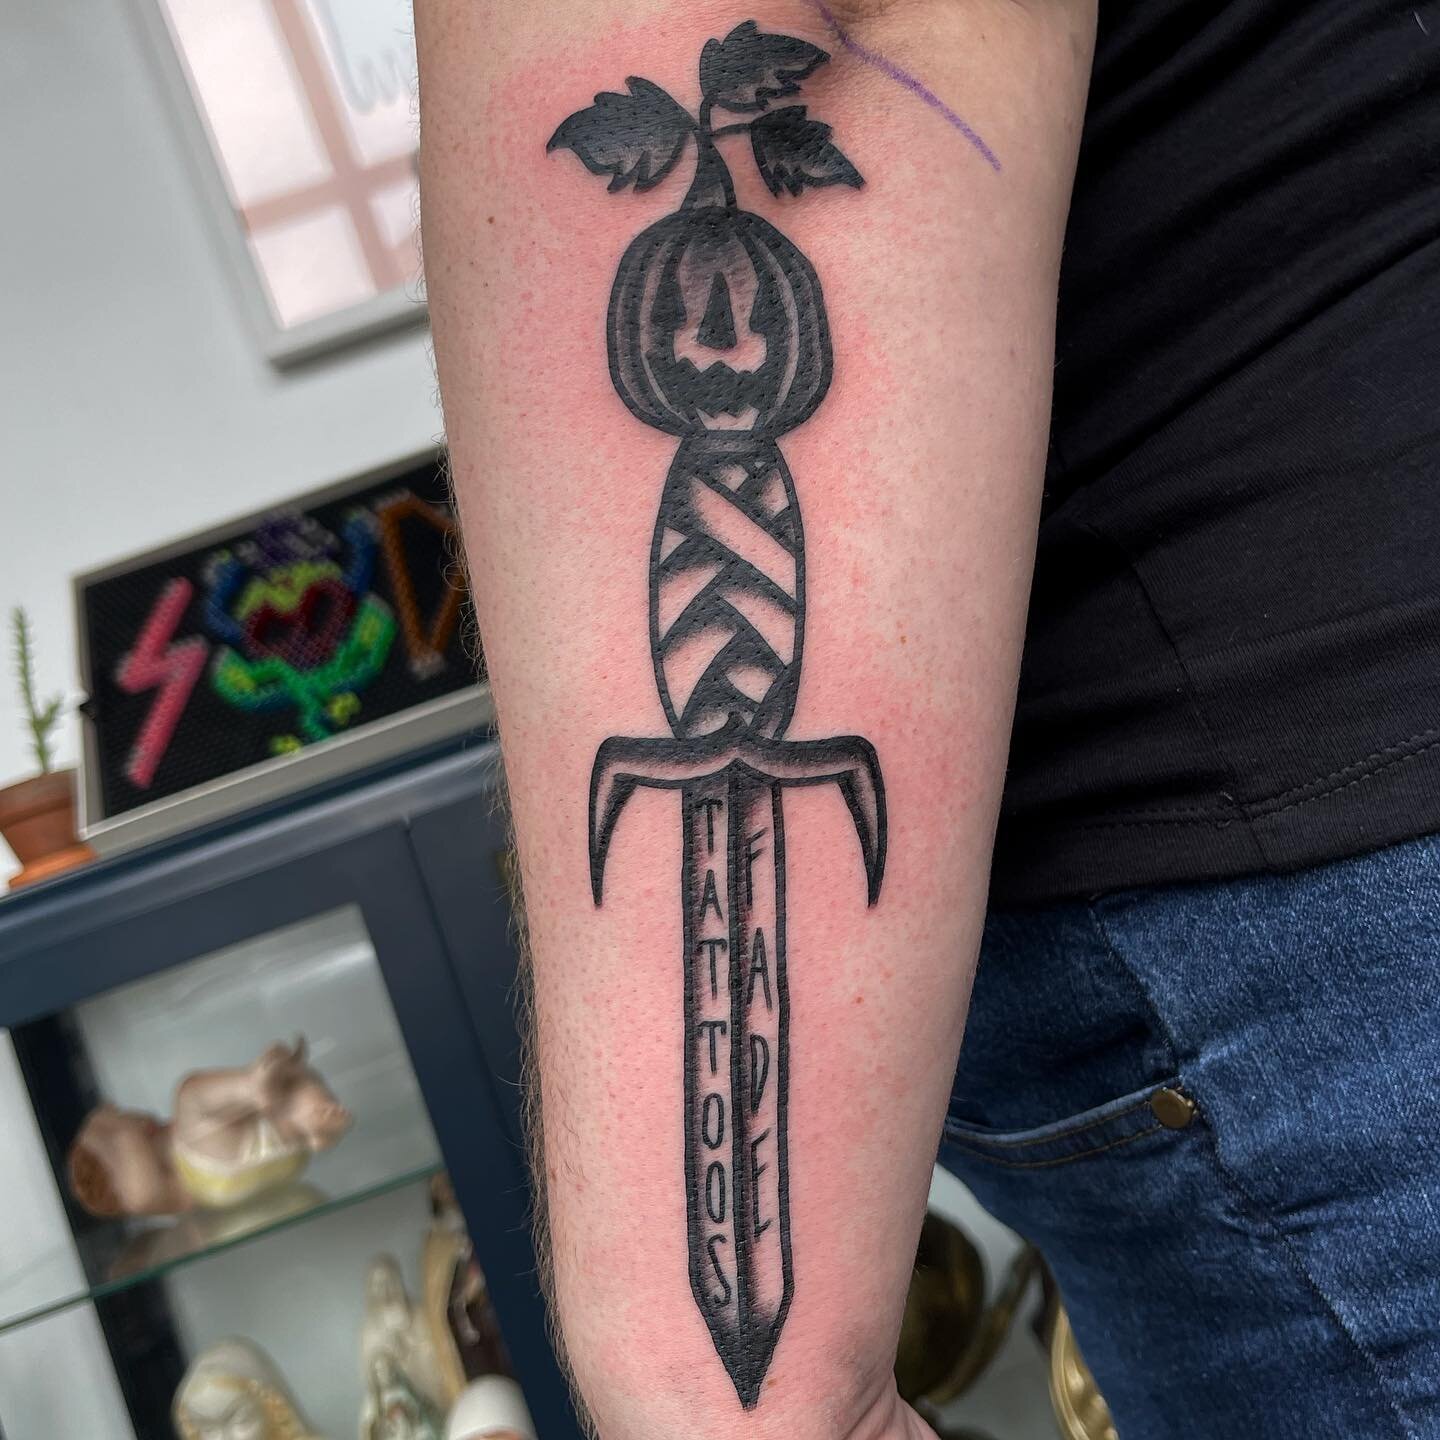 A fresh pumpkin dagger and a healed pumpkin skeleton. I have one spot open tomorrow, dr.crimeboy@gmail with &ldquo;Friday&rdquo; in the memo for the spot, thanks !
#blackwork #blackworkers #traditionaltattoo #tradworkers #americantraditional #bostont